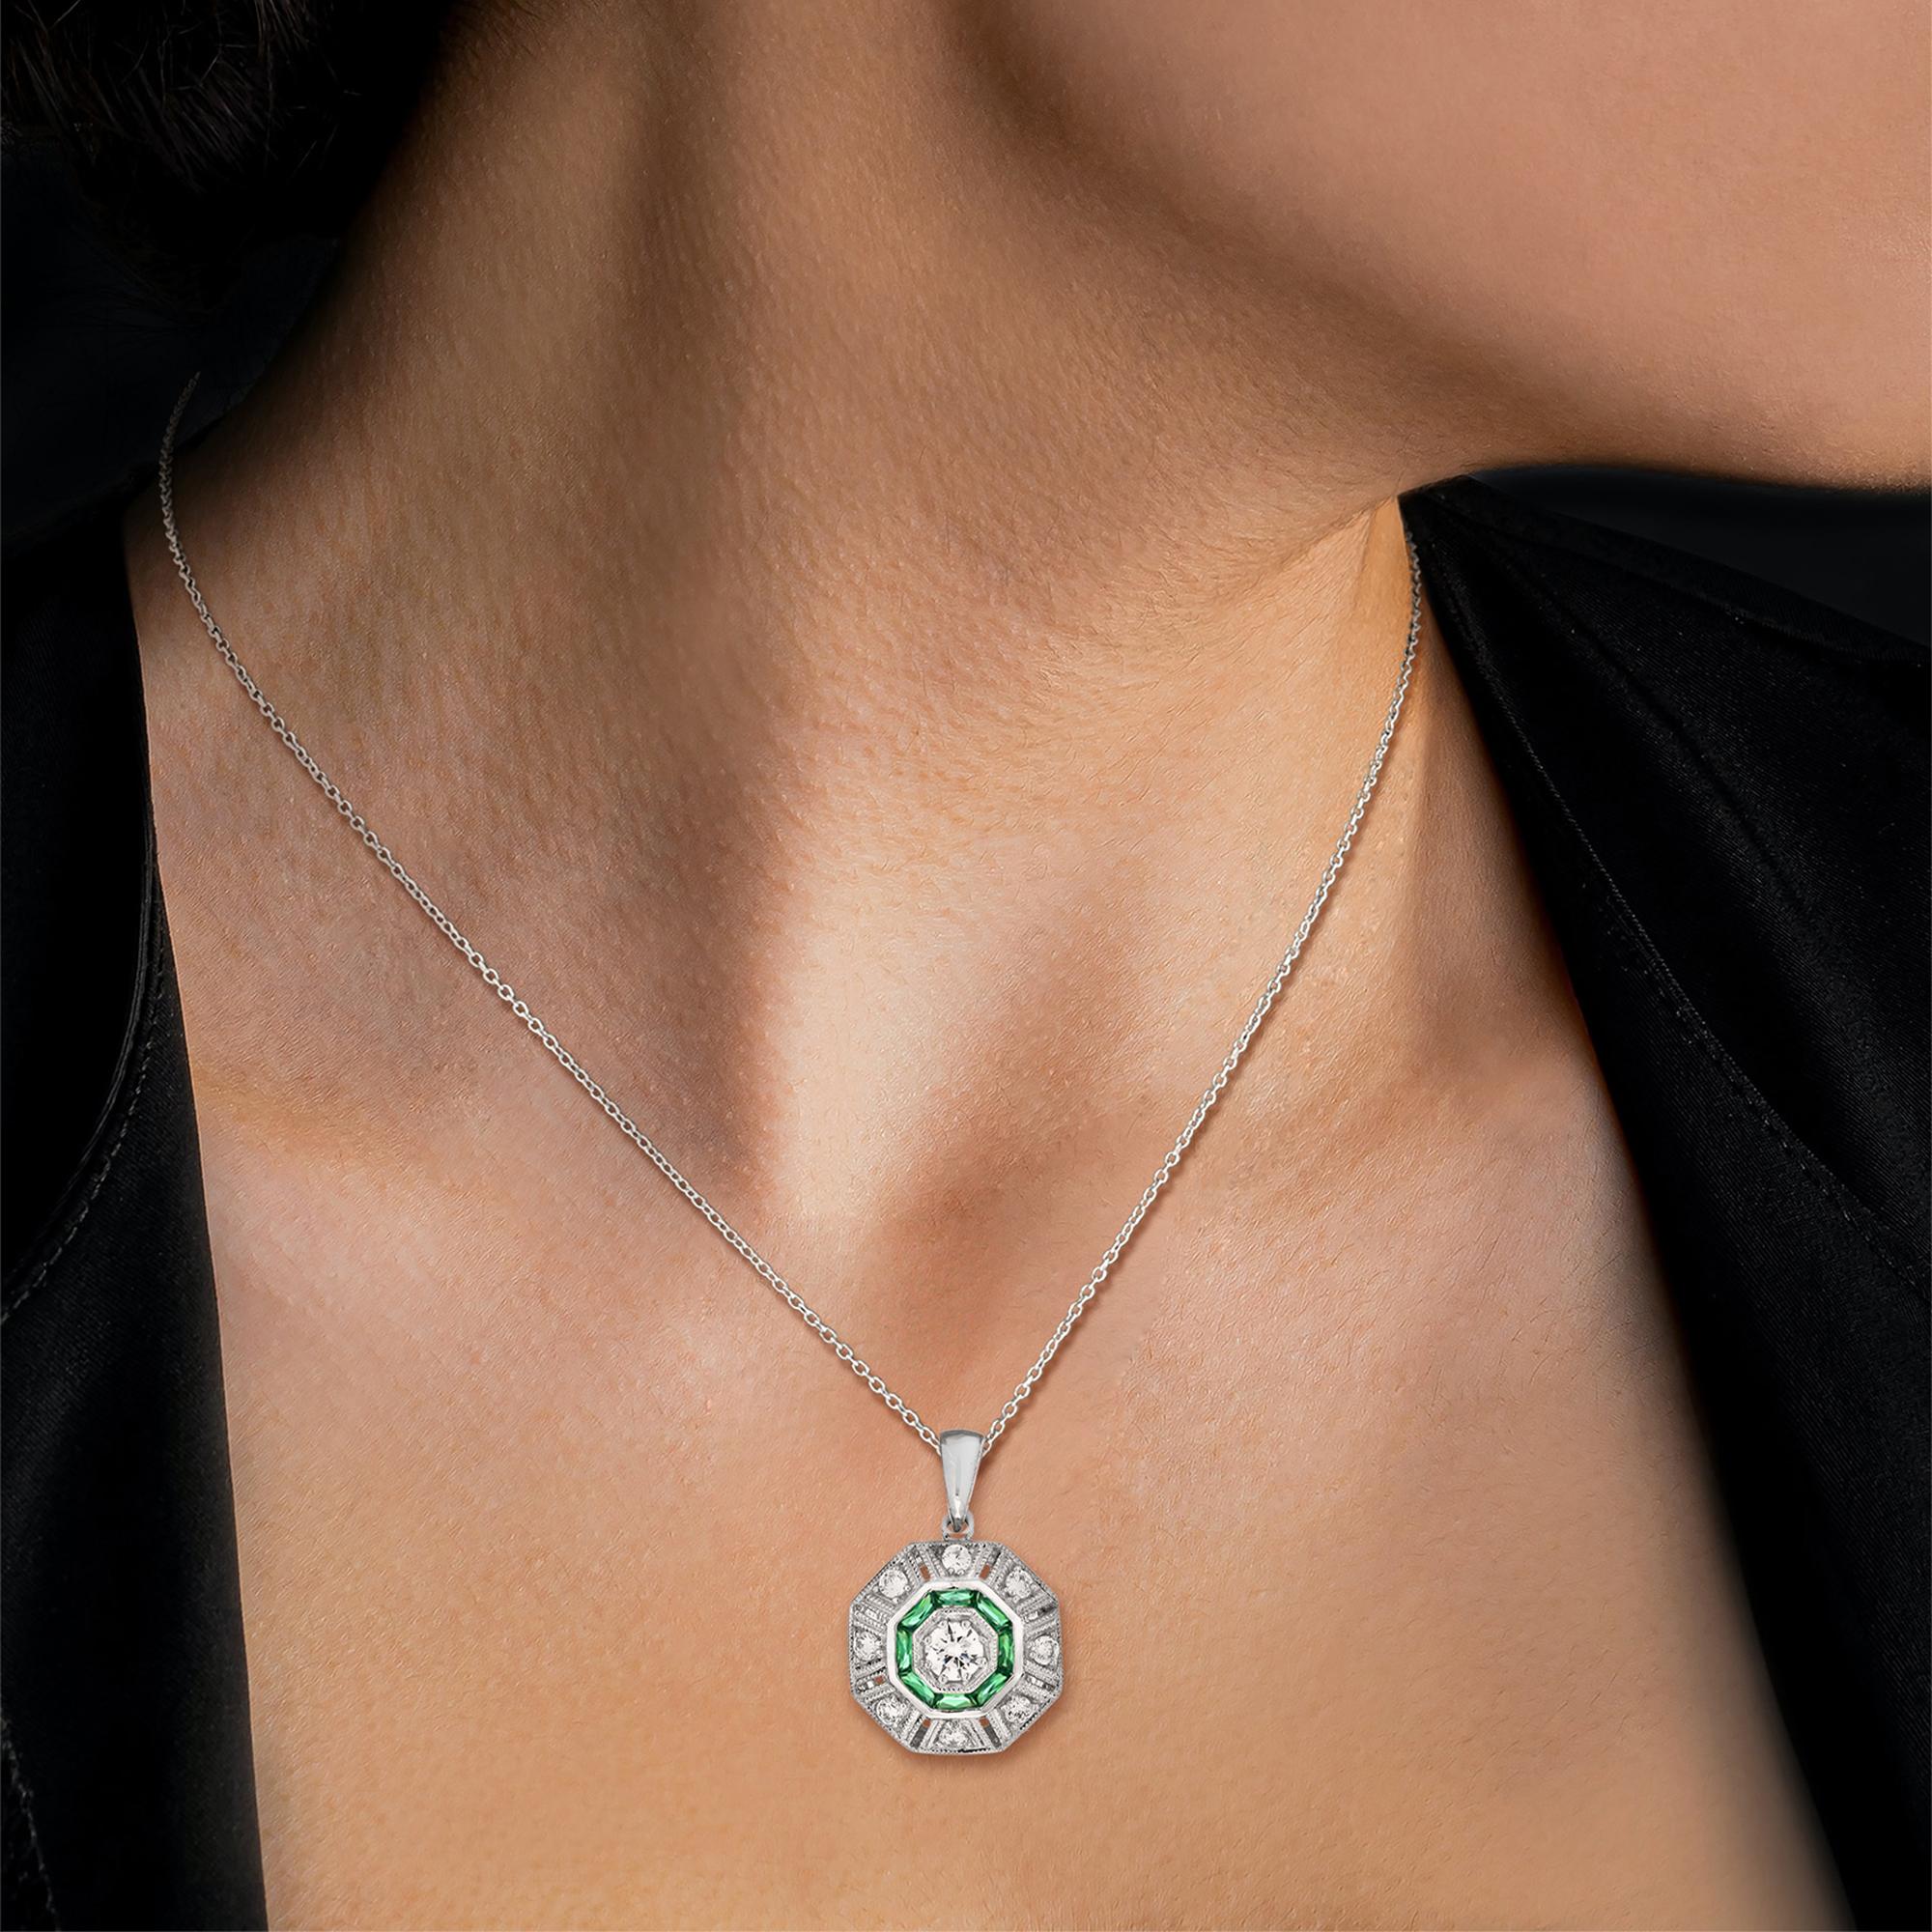 An 14k white gold Art-Deco design diamond and emerald target pendant, center diamond with an outer of round diamonds an inner one of French cut emeralds and finished with millgrain edging.

Information
Metal: 14K White Gold
Width: 15 mm.
Length: 22